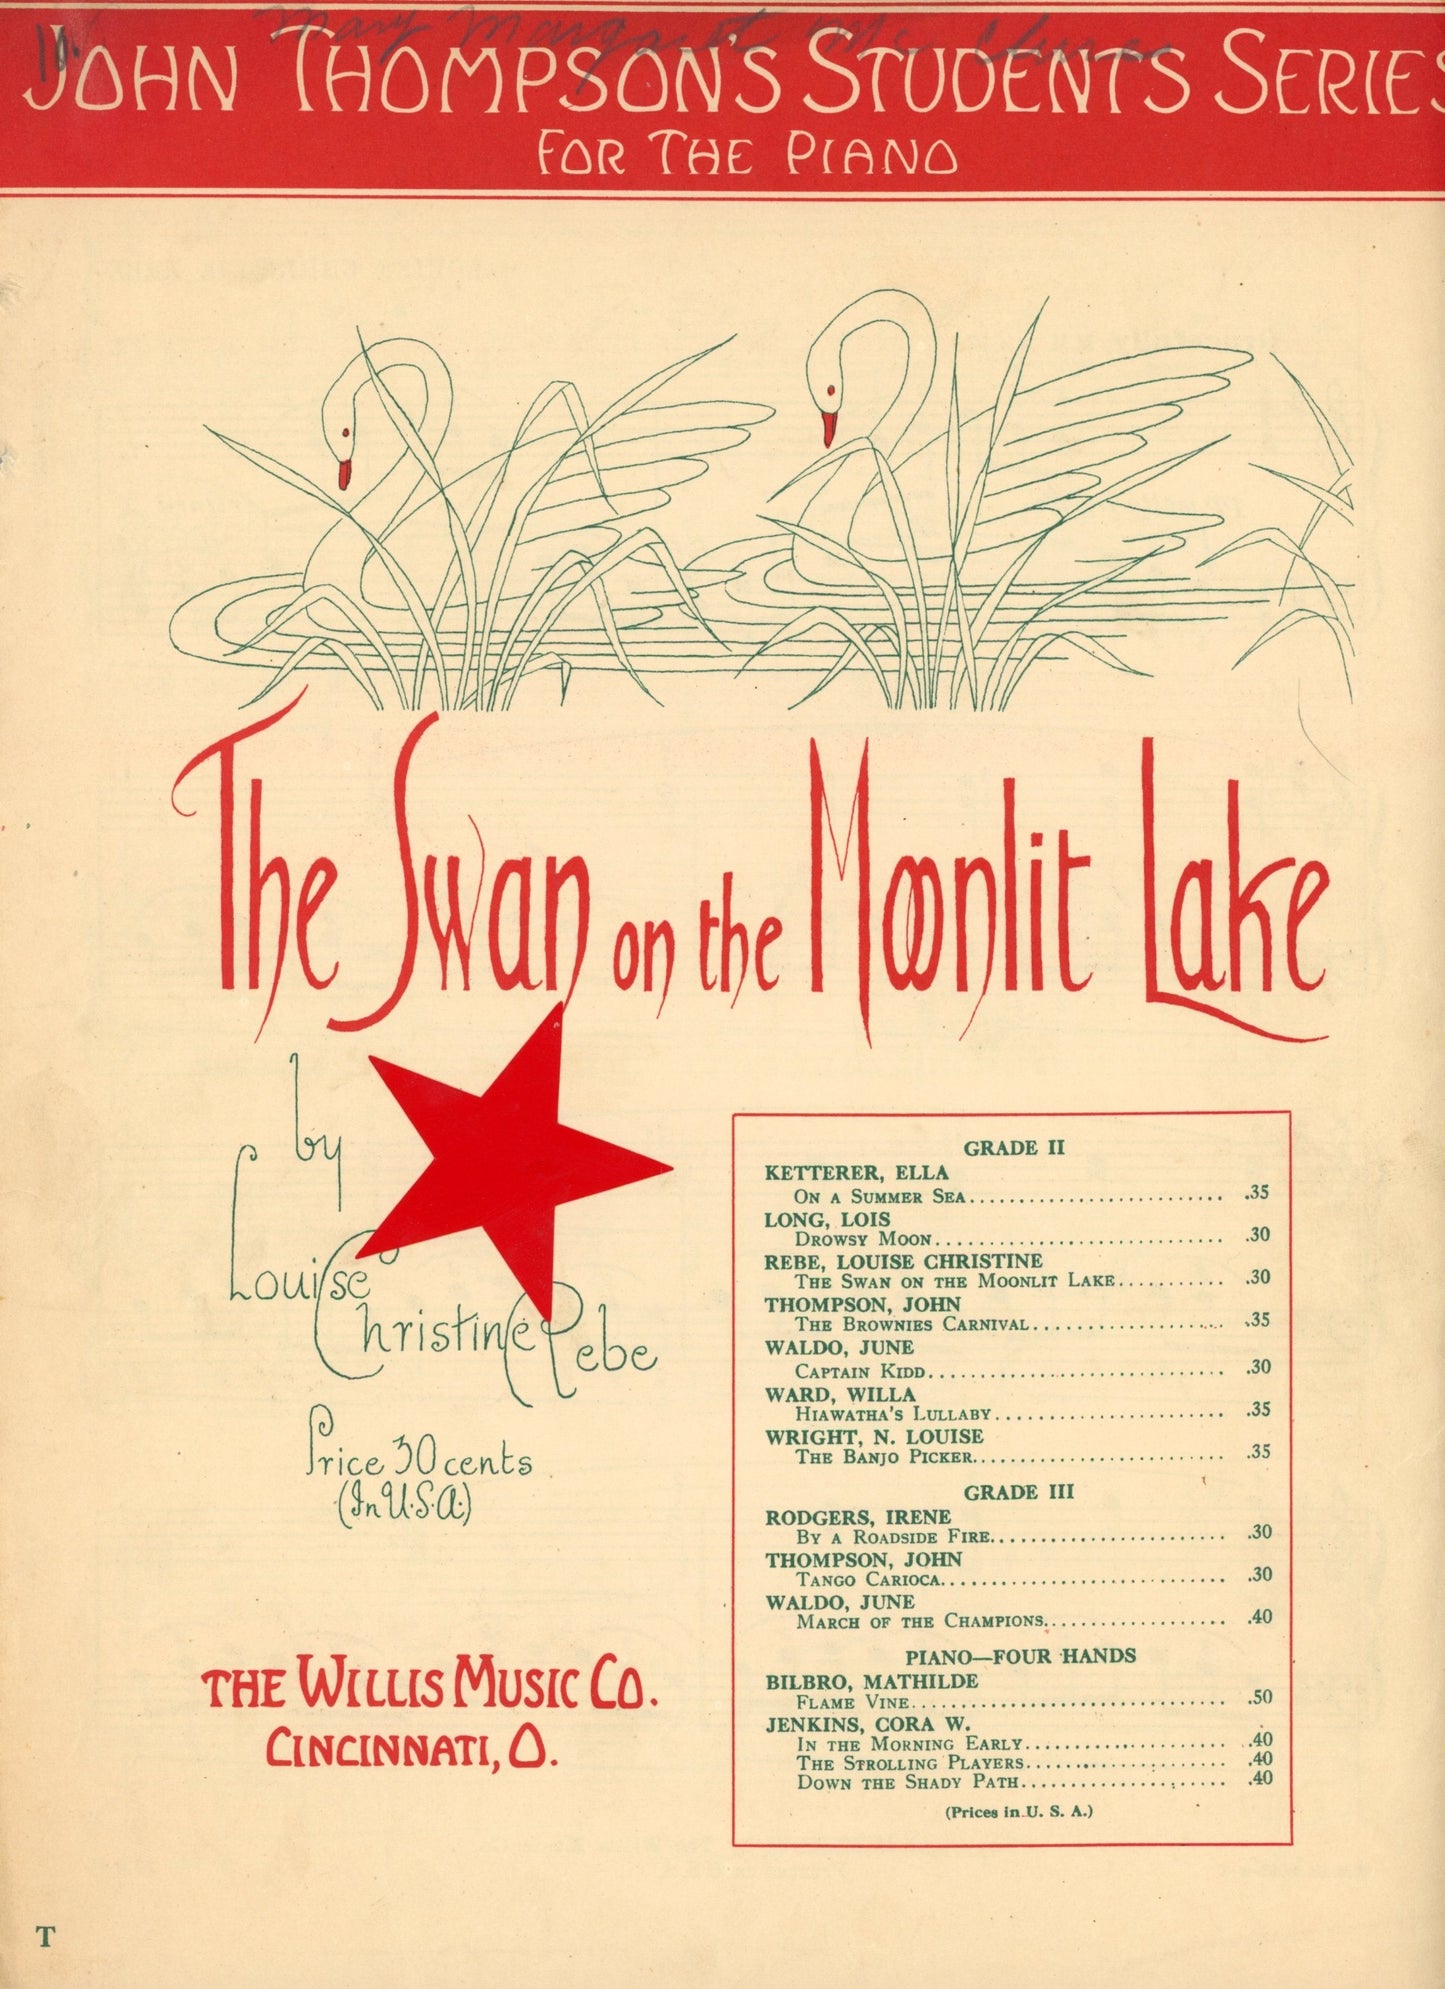 THE SWAN ON THE MOONLIT LAKE Vintage Sheet Music by Louise Christine Rebe ©1936